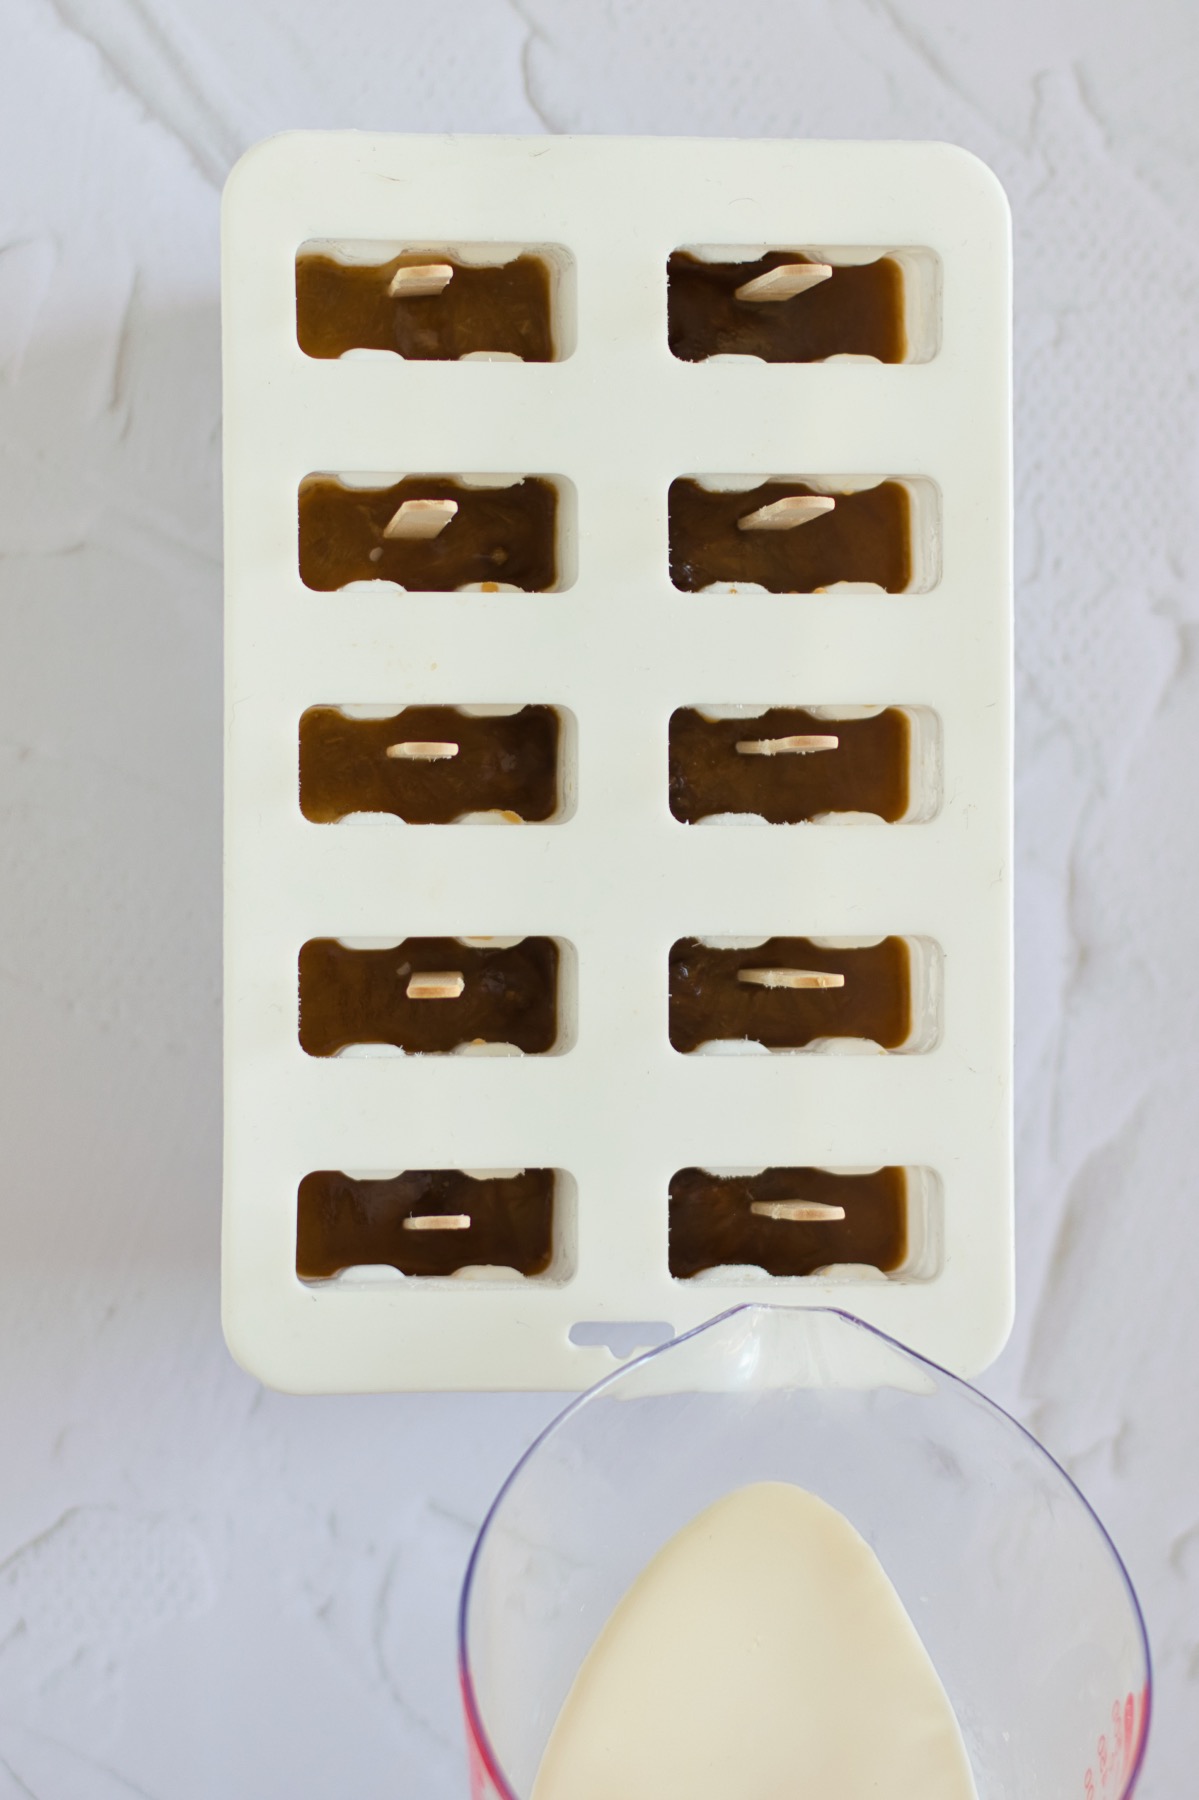 add the latte layer to the popsicle mold